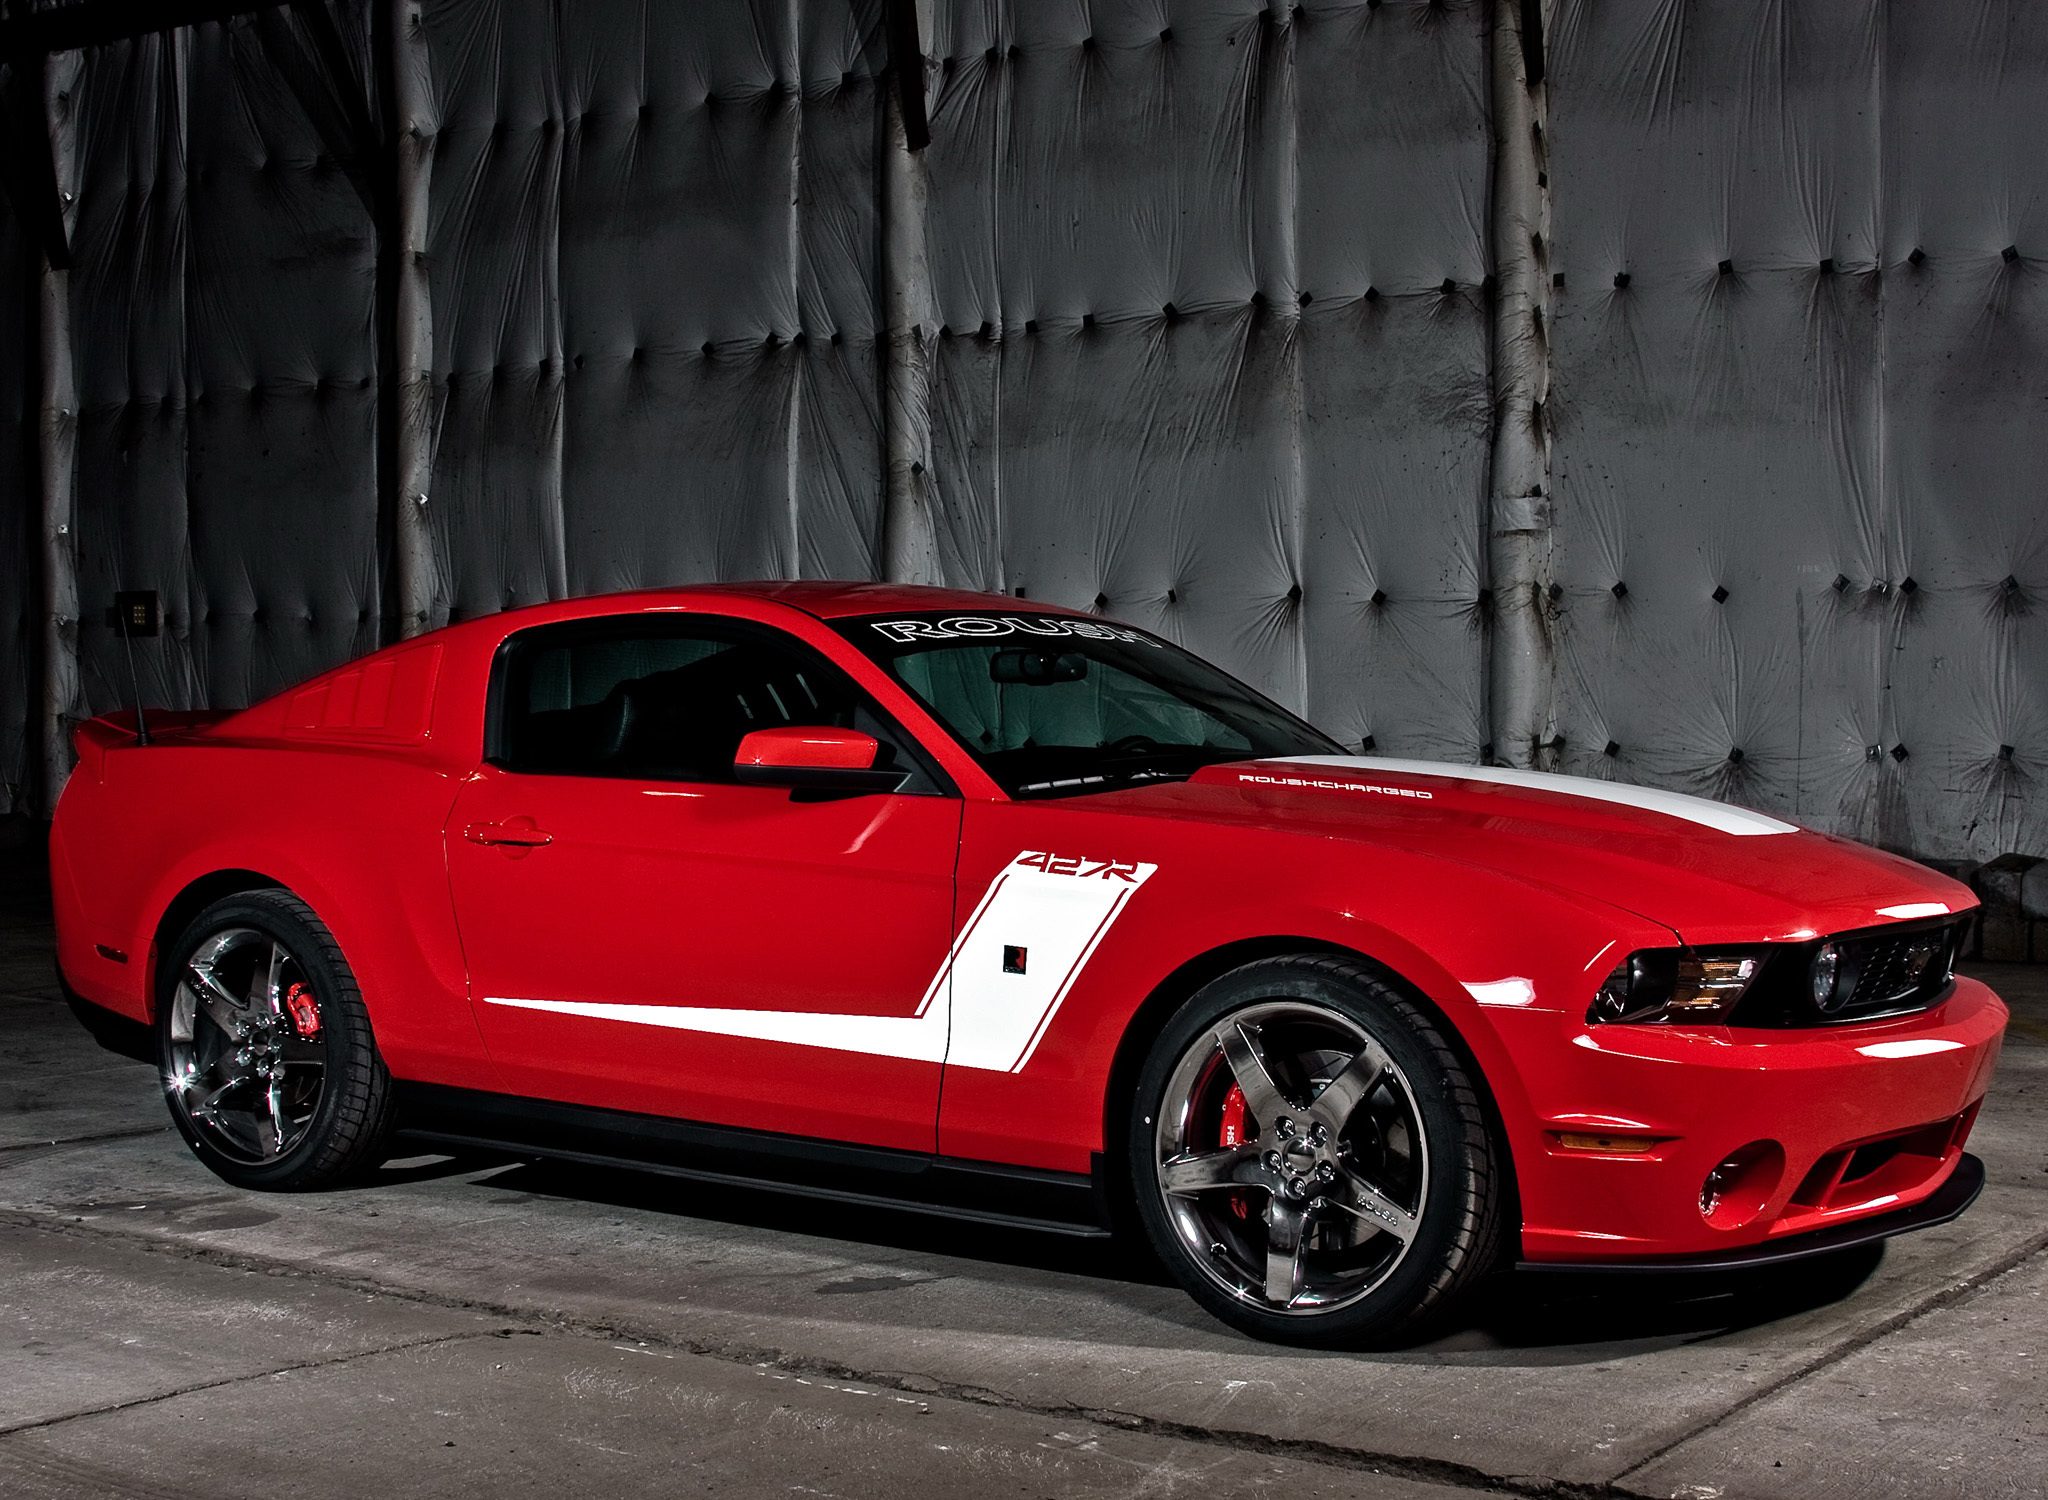 Mustang Of The Day: 2010 Roush 427R Mustang